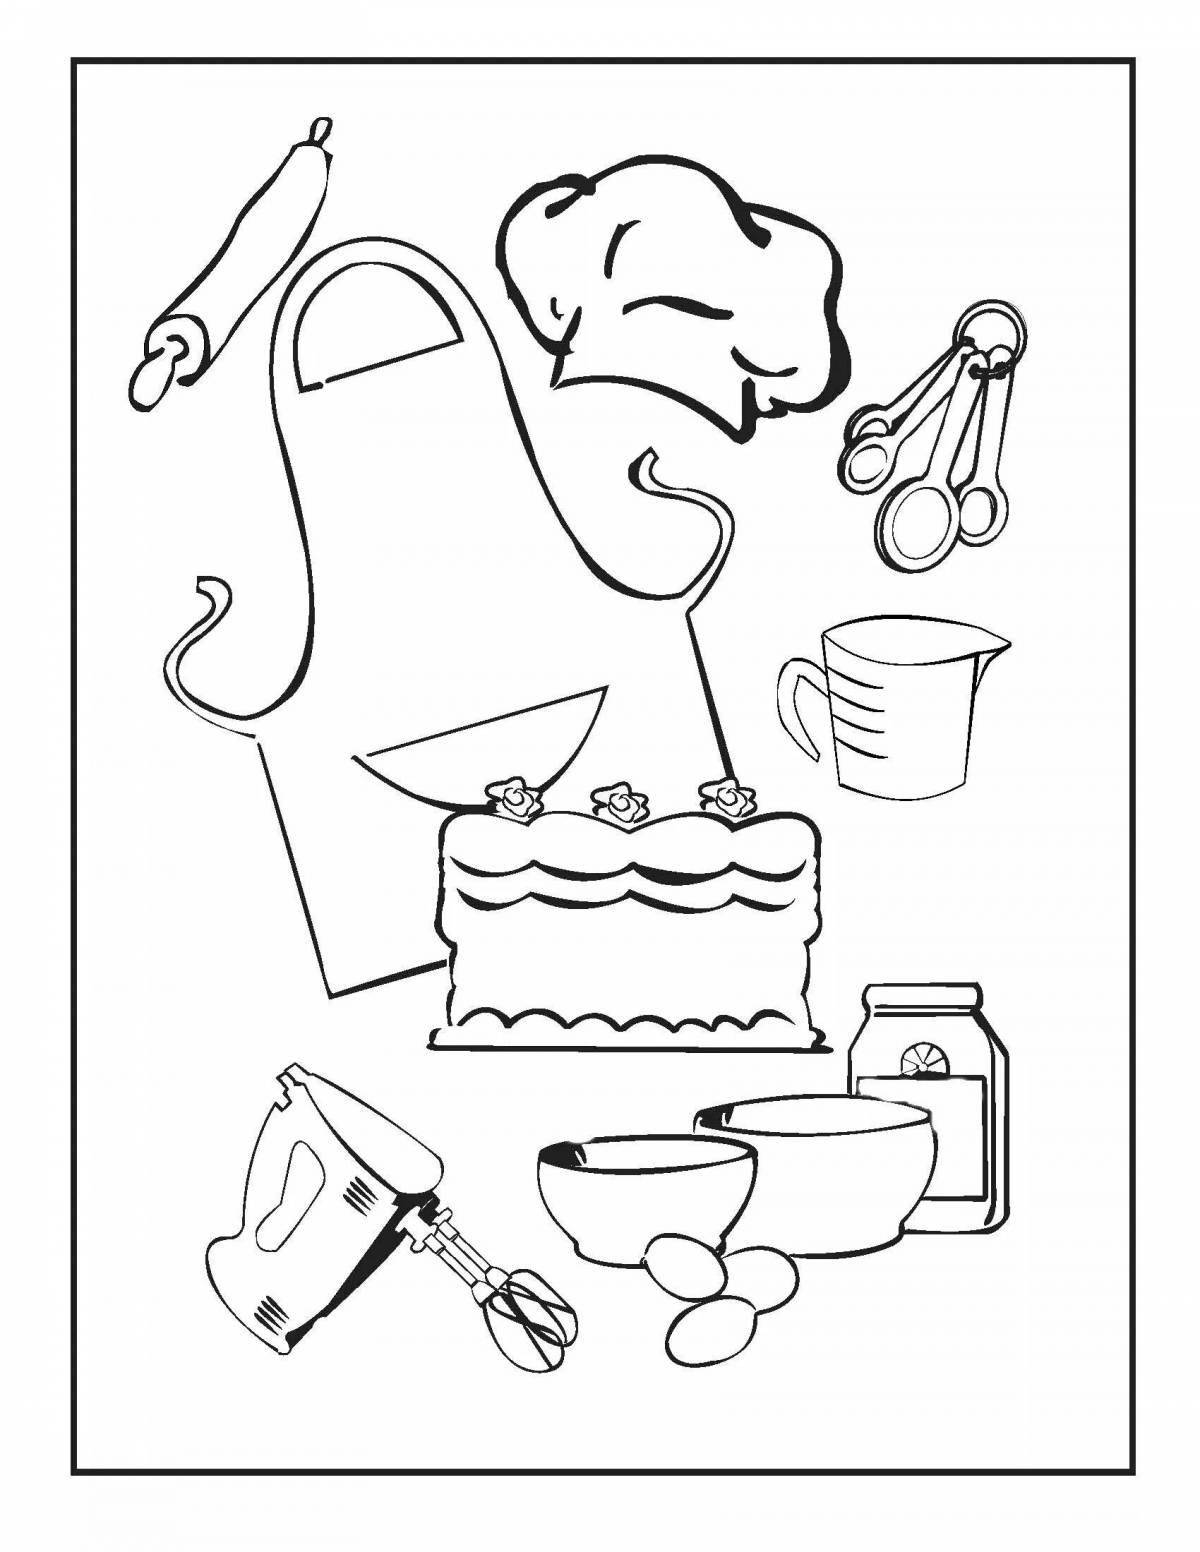 Pastry chef coloring page